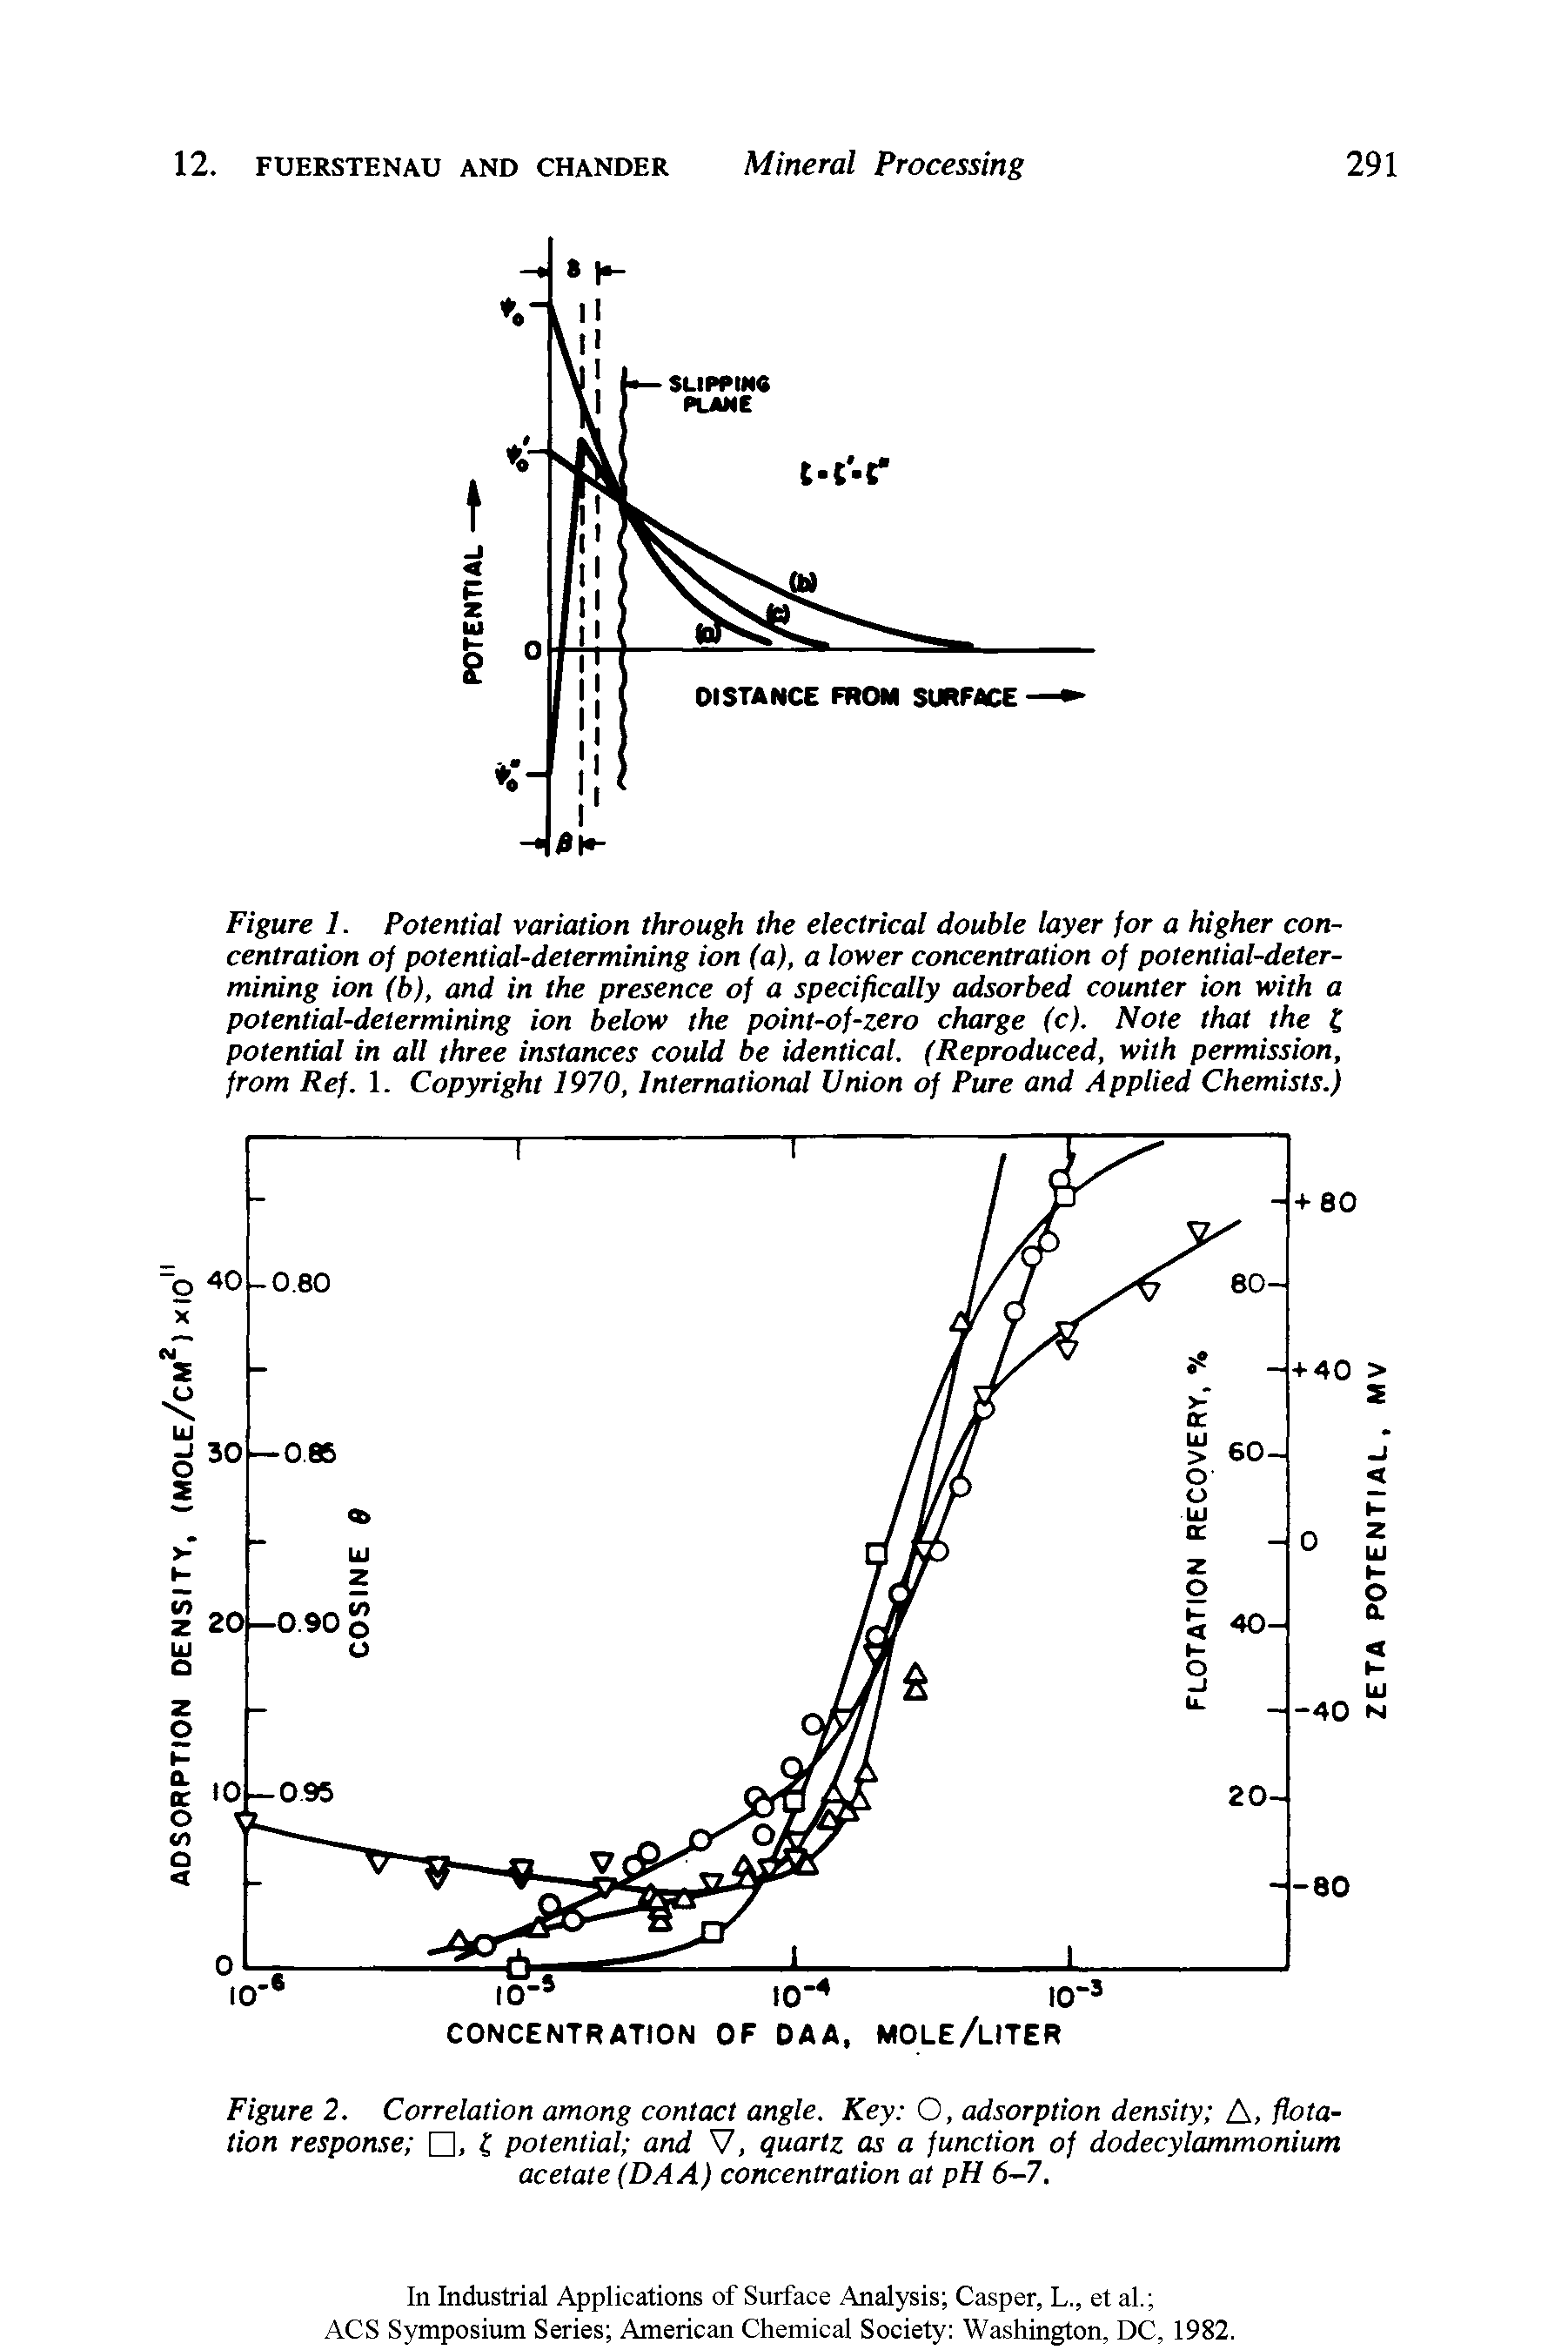 Figure 2. Correlation among contact angle. Key O, adsorption density A, flotation response , potential and V, quartz as a function of dodecylammonium acetate (DA A) concentration at pH 6-7.